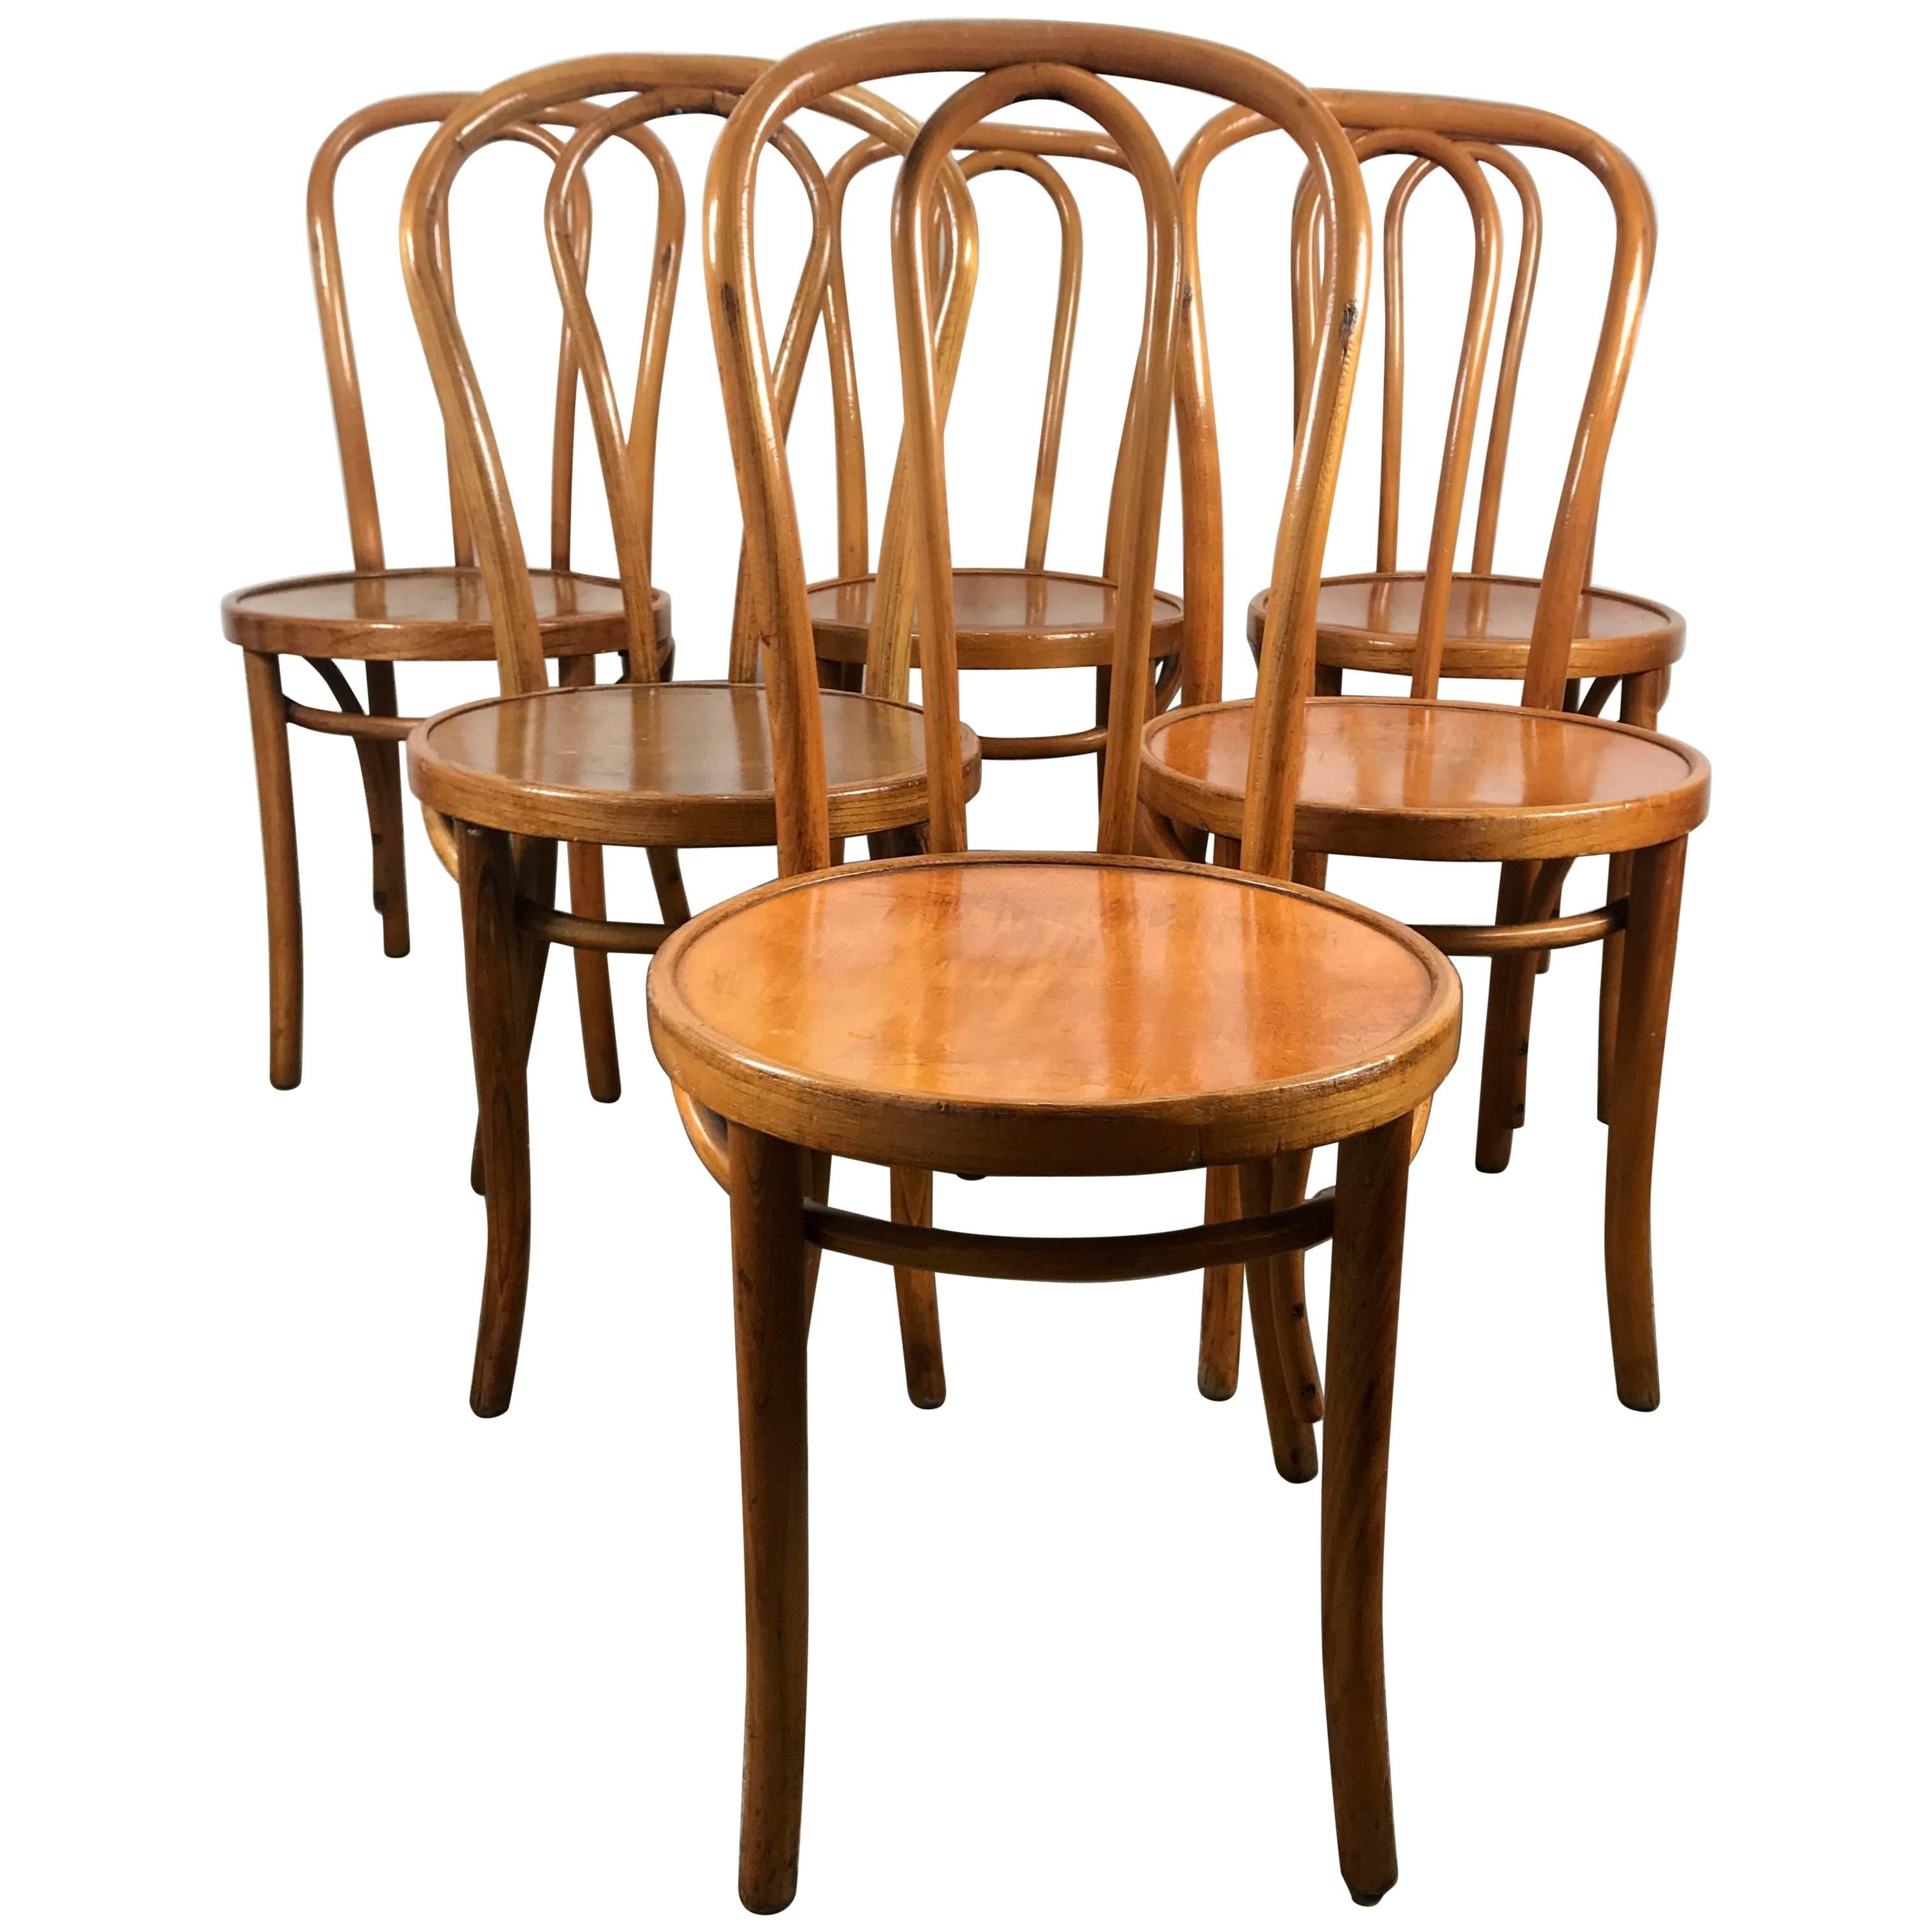 Set of Six Classic American Bentwood Side Chairs by Thonet, New York